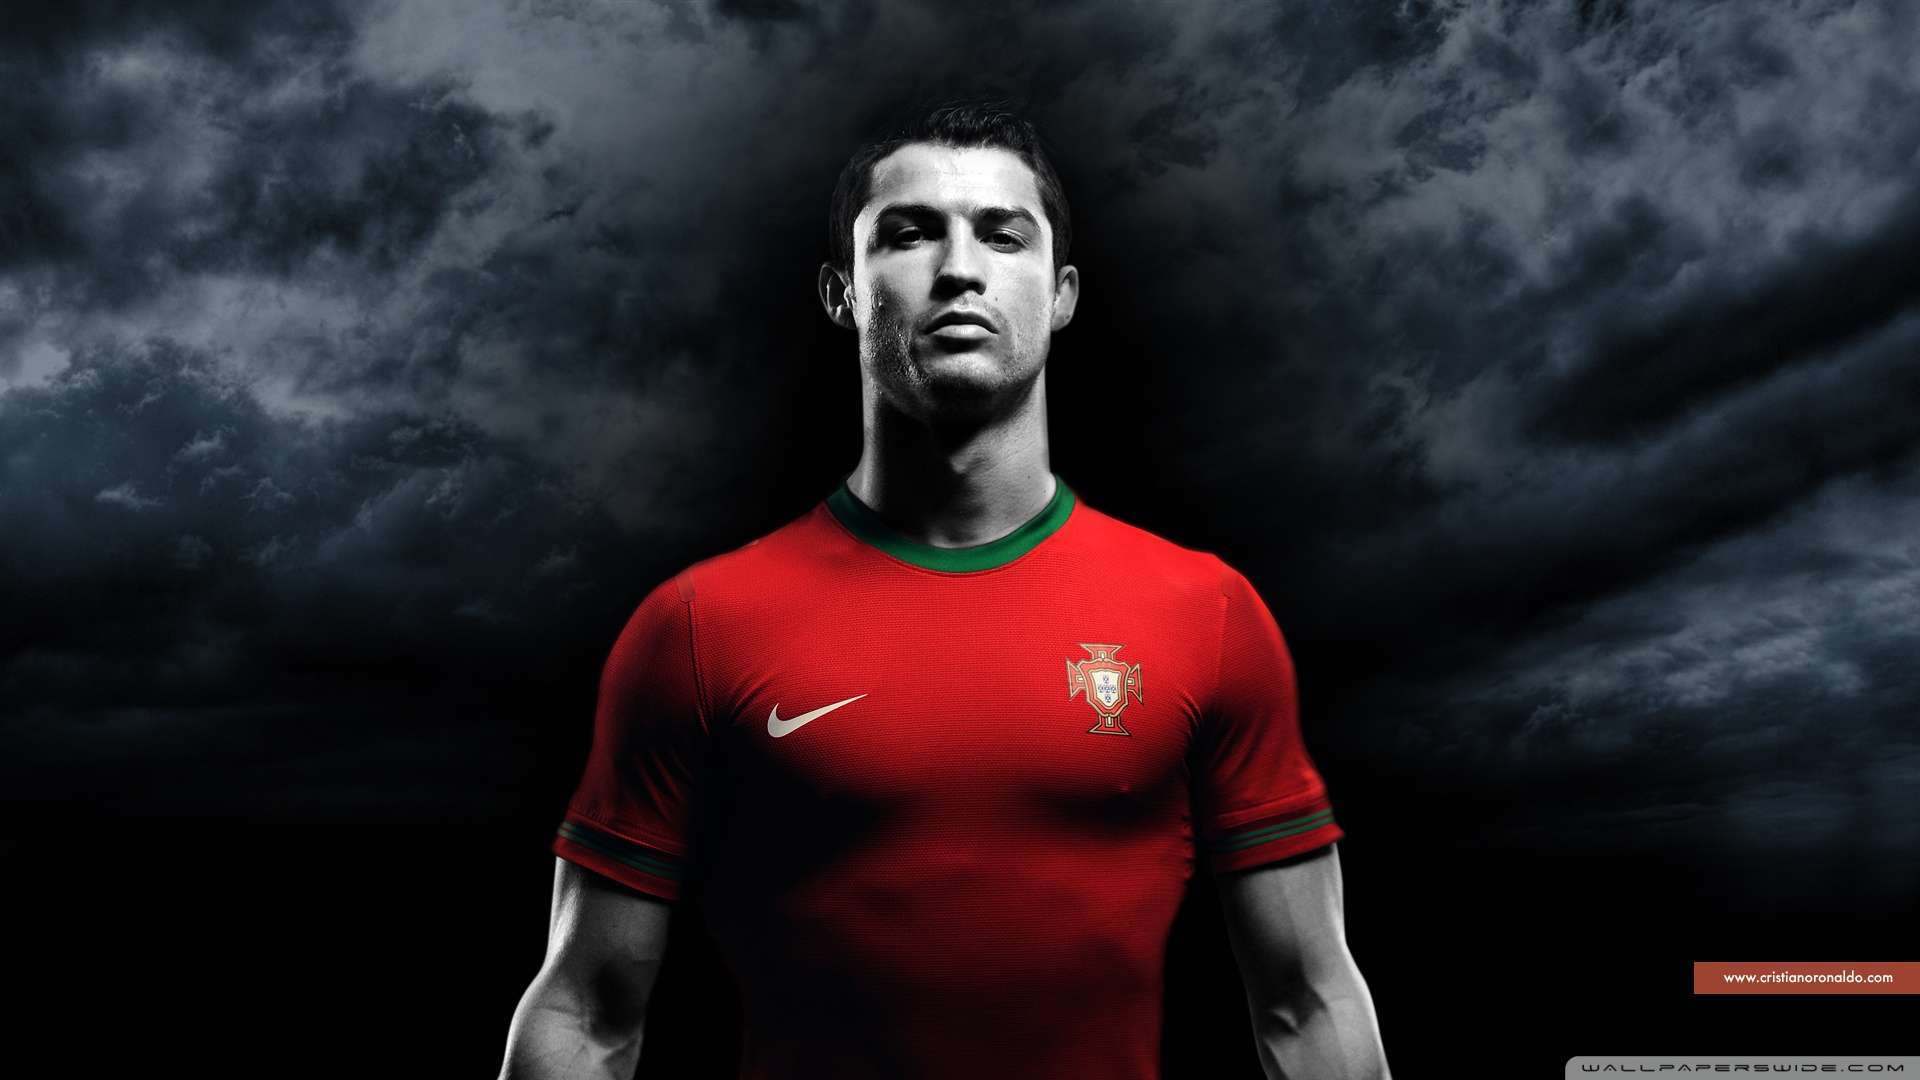 Wallpaper Cr7 1080p HD Upload At February By